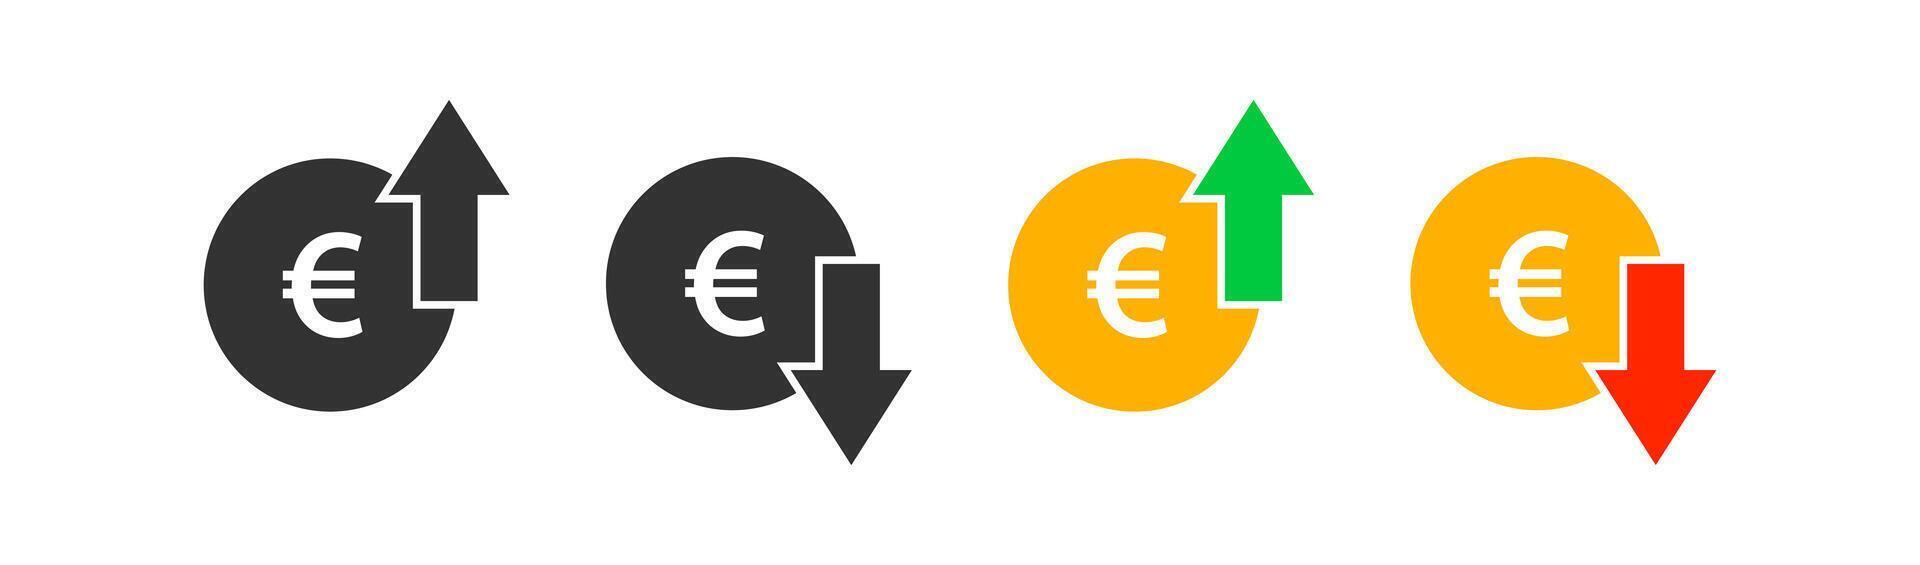 Euro coin graph up and down. Money cost arrow growth, decline. Currency investment. Market price. Finance exchange. Vector illustration.